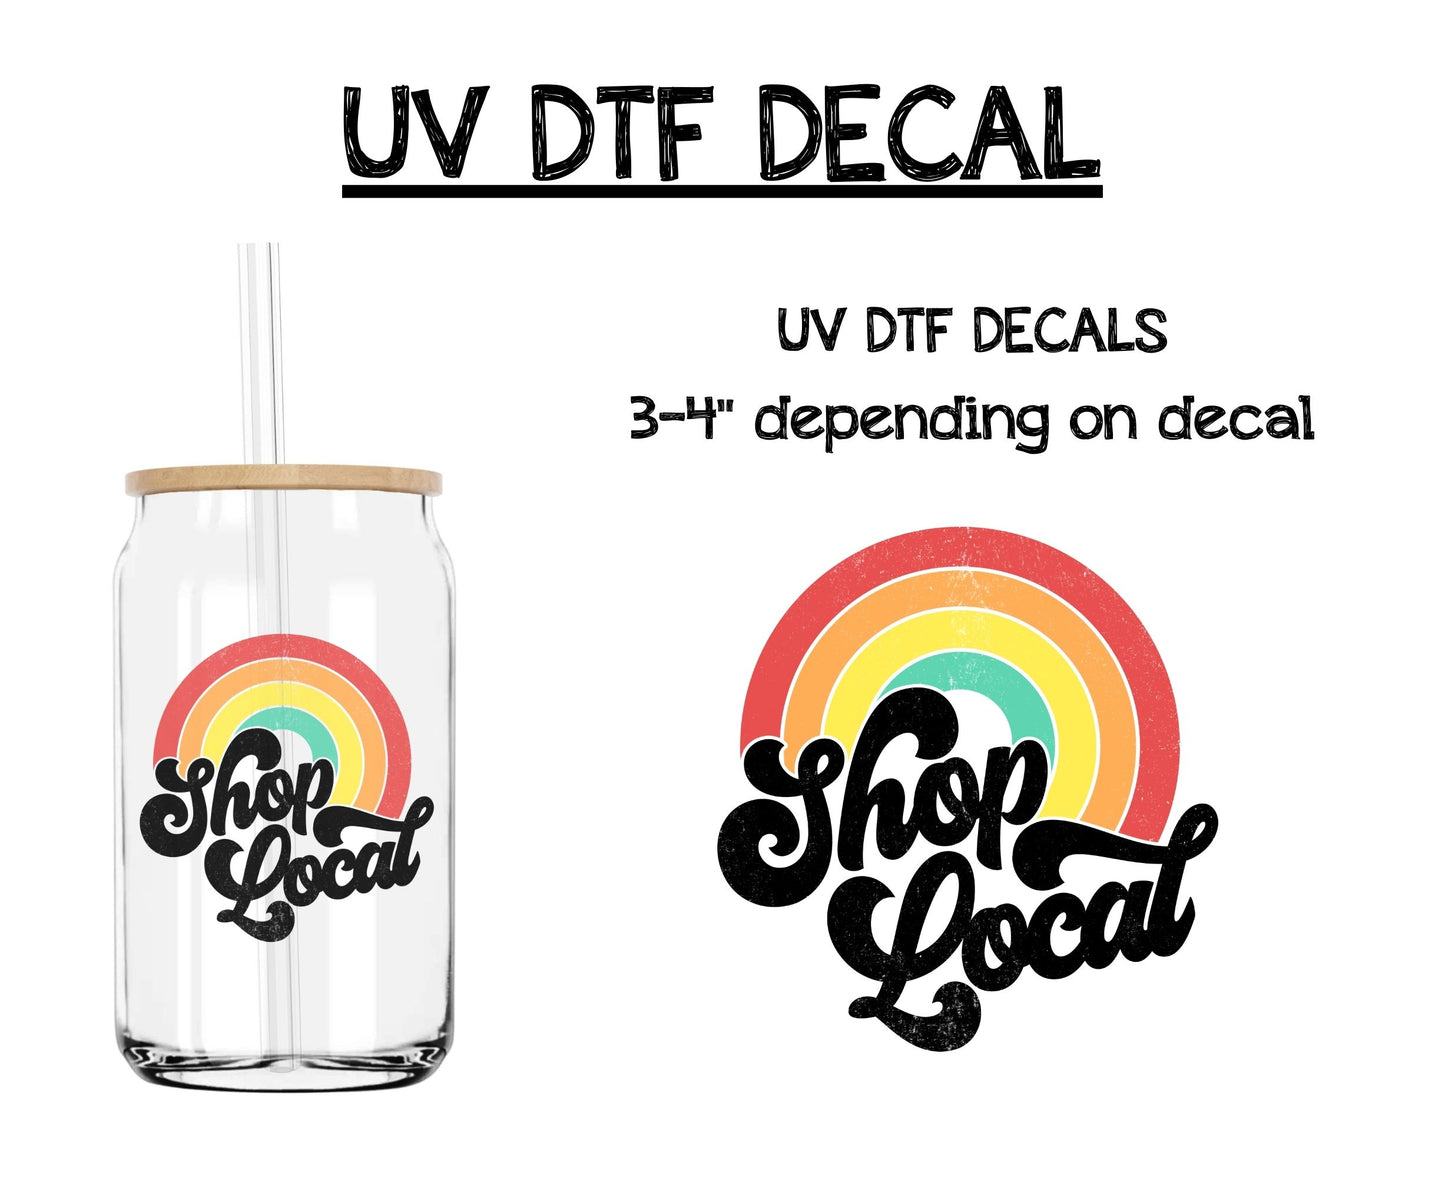 Shop Local - UV DTF DECAL